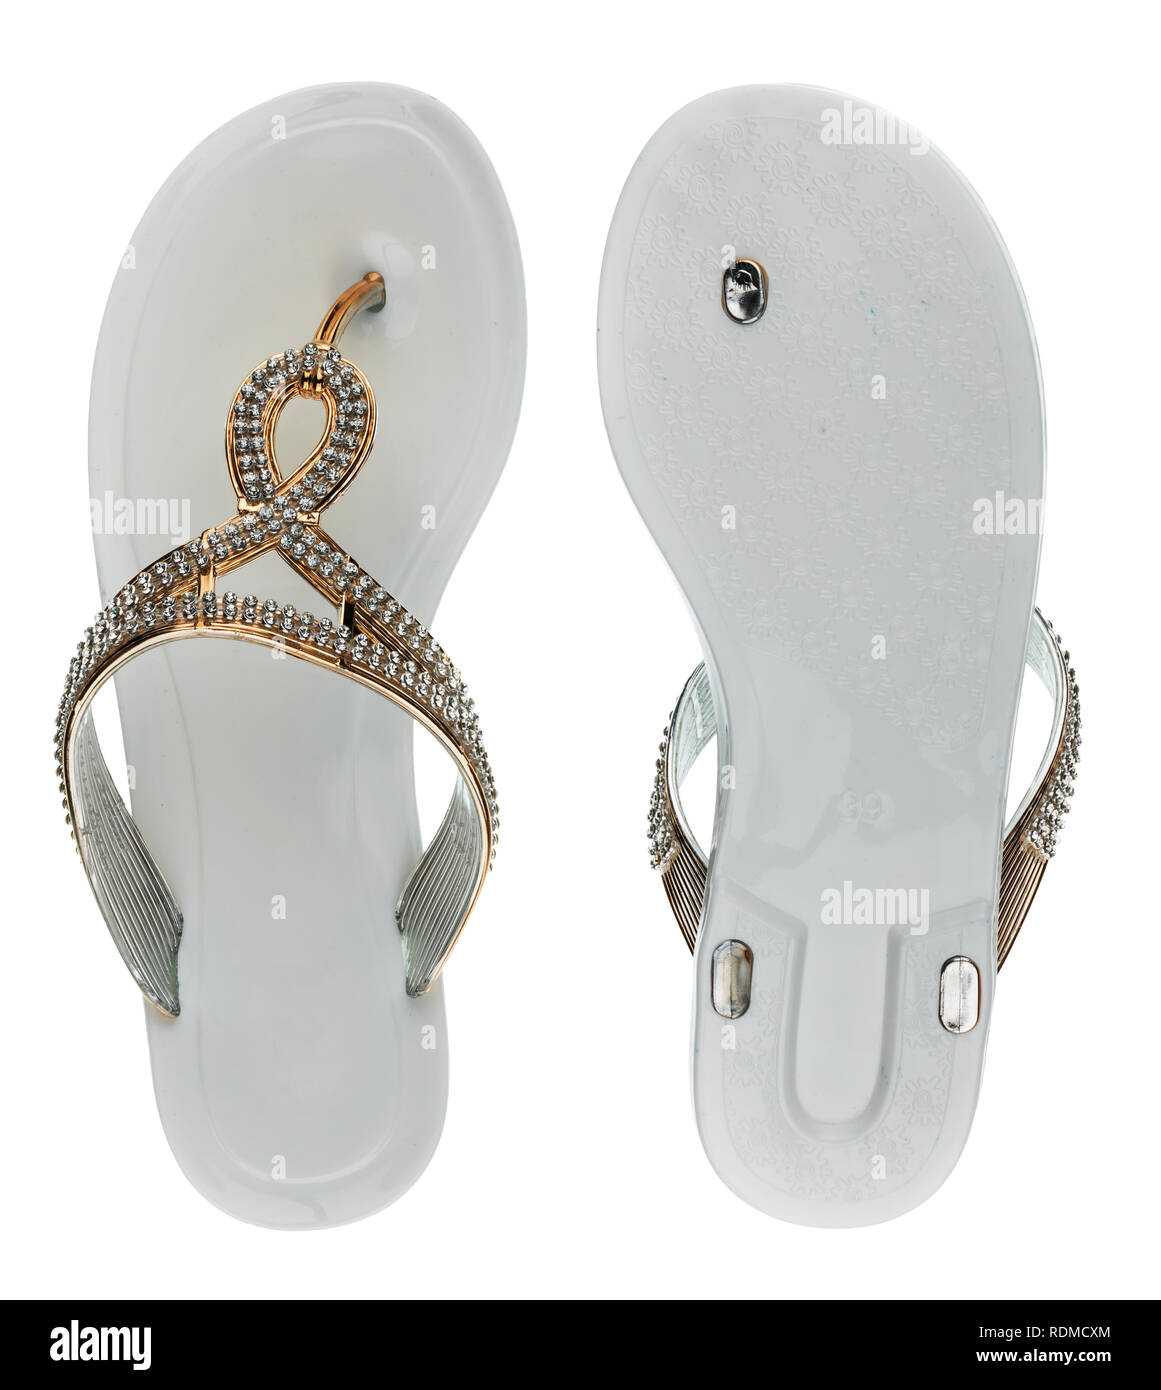 White flip-flops in rhinestones bottom view and top view. Isolated on white background Stock Photo